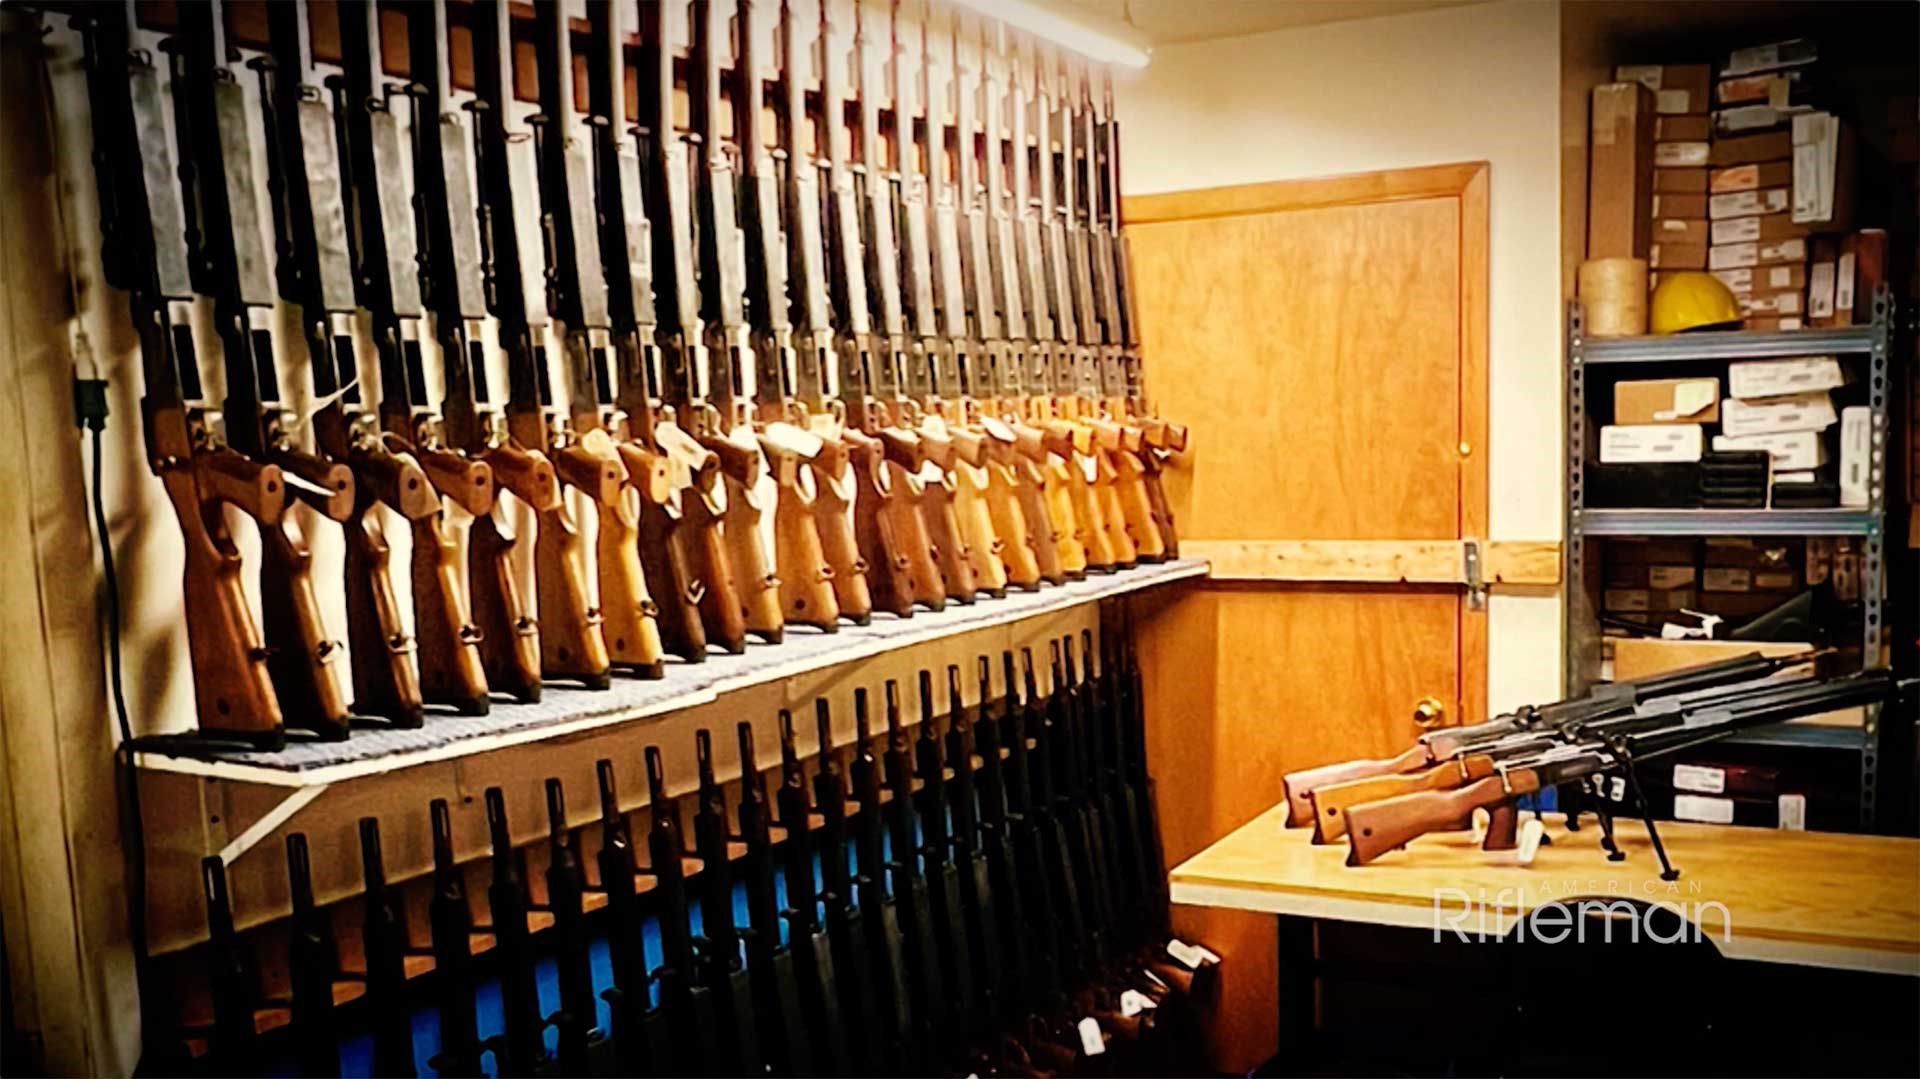 Racks of French FRF2 sniper rifles shown at the Navy Arms warehouse in West Virginia.